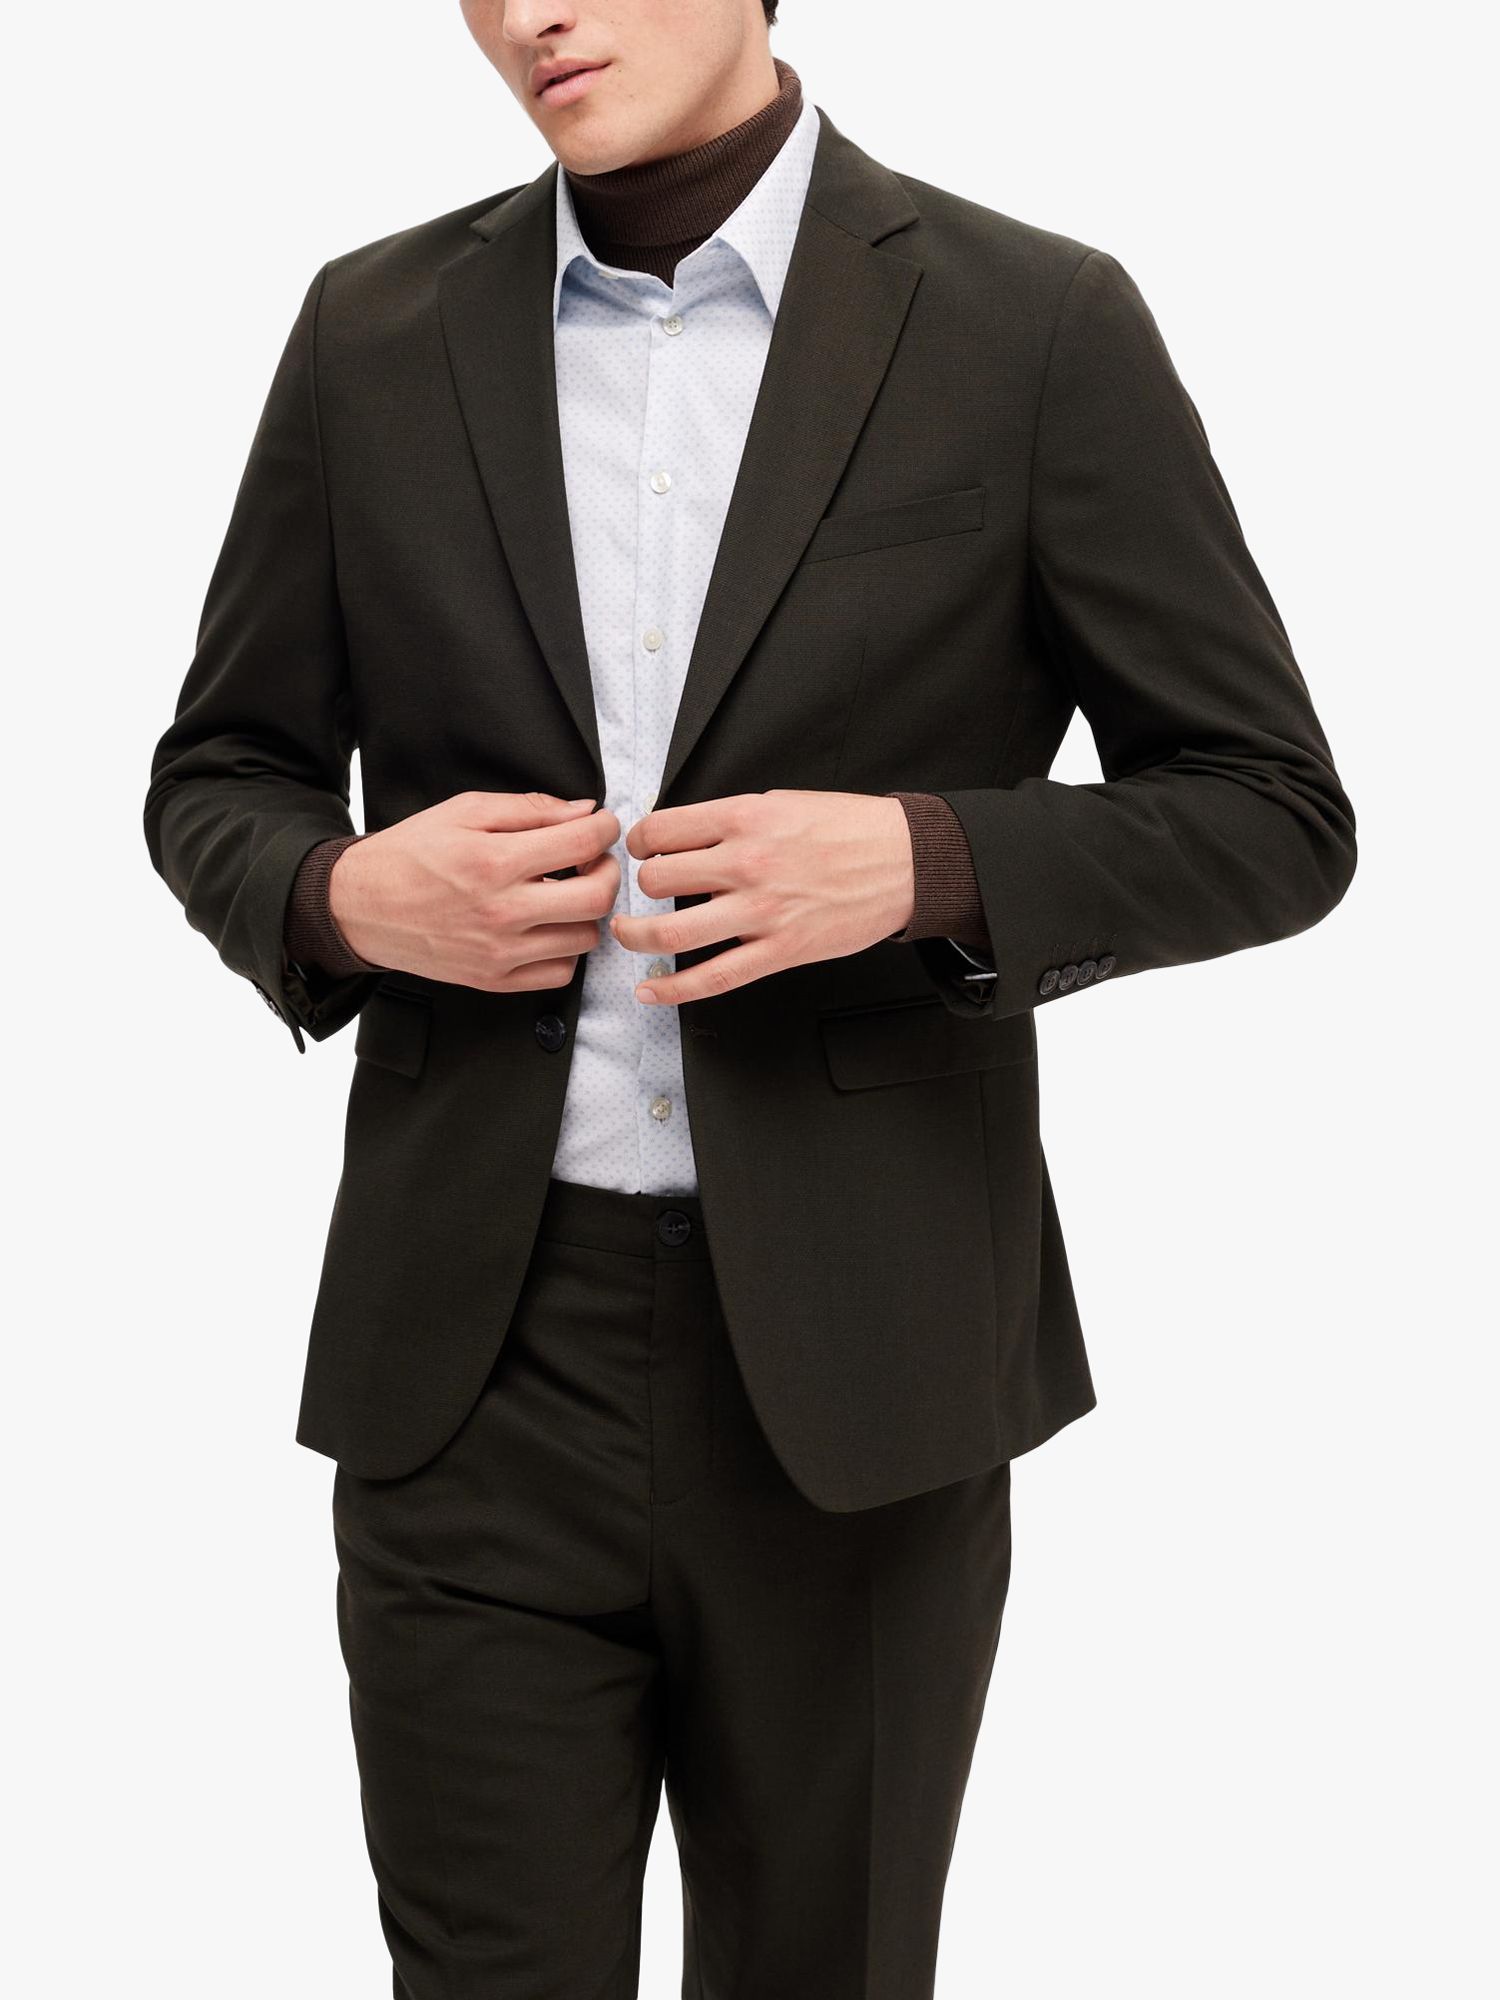 Buy SELECTED HOMME Formal Long Sleeve Shirt, White Online at johnlewis.com